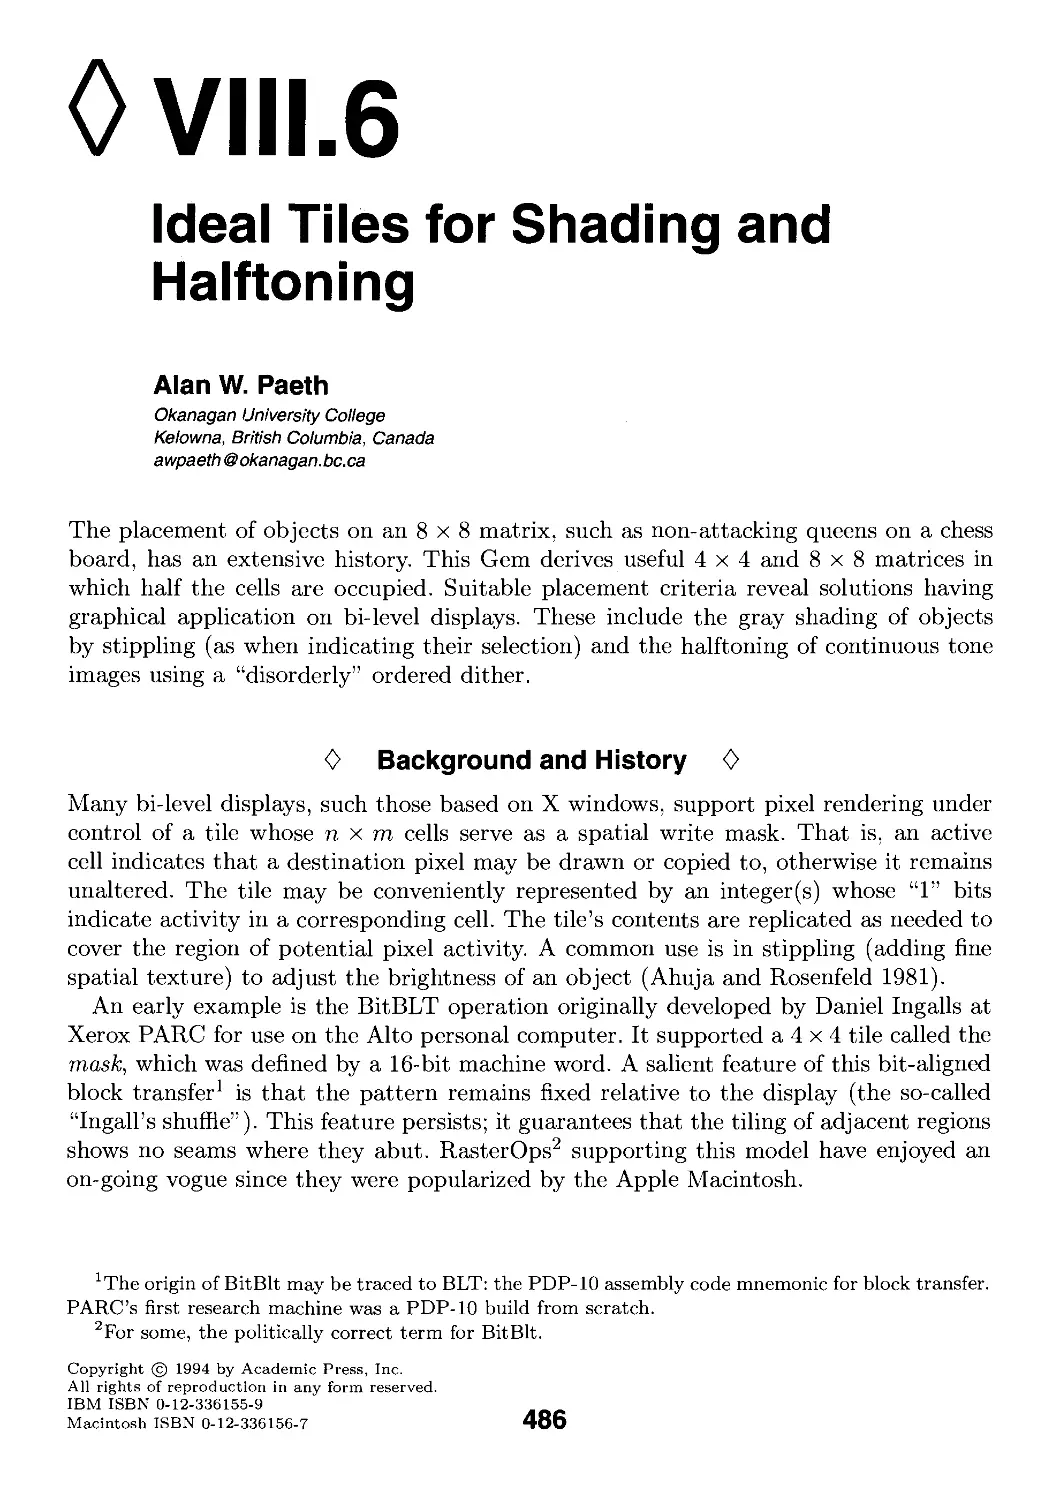 VIII.6. Ideal Tiles for Shading and Halftoning by Alan W. Paeth